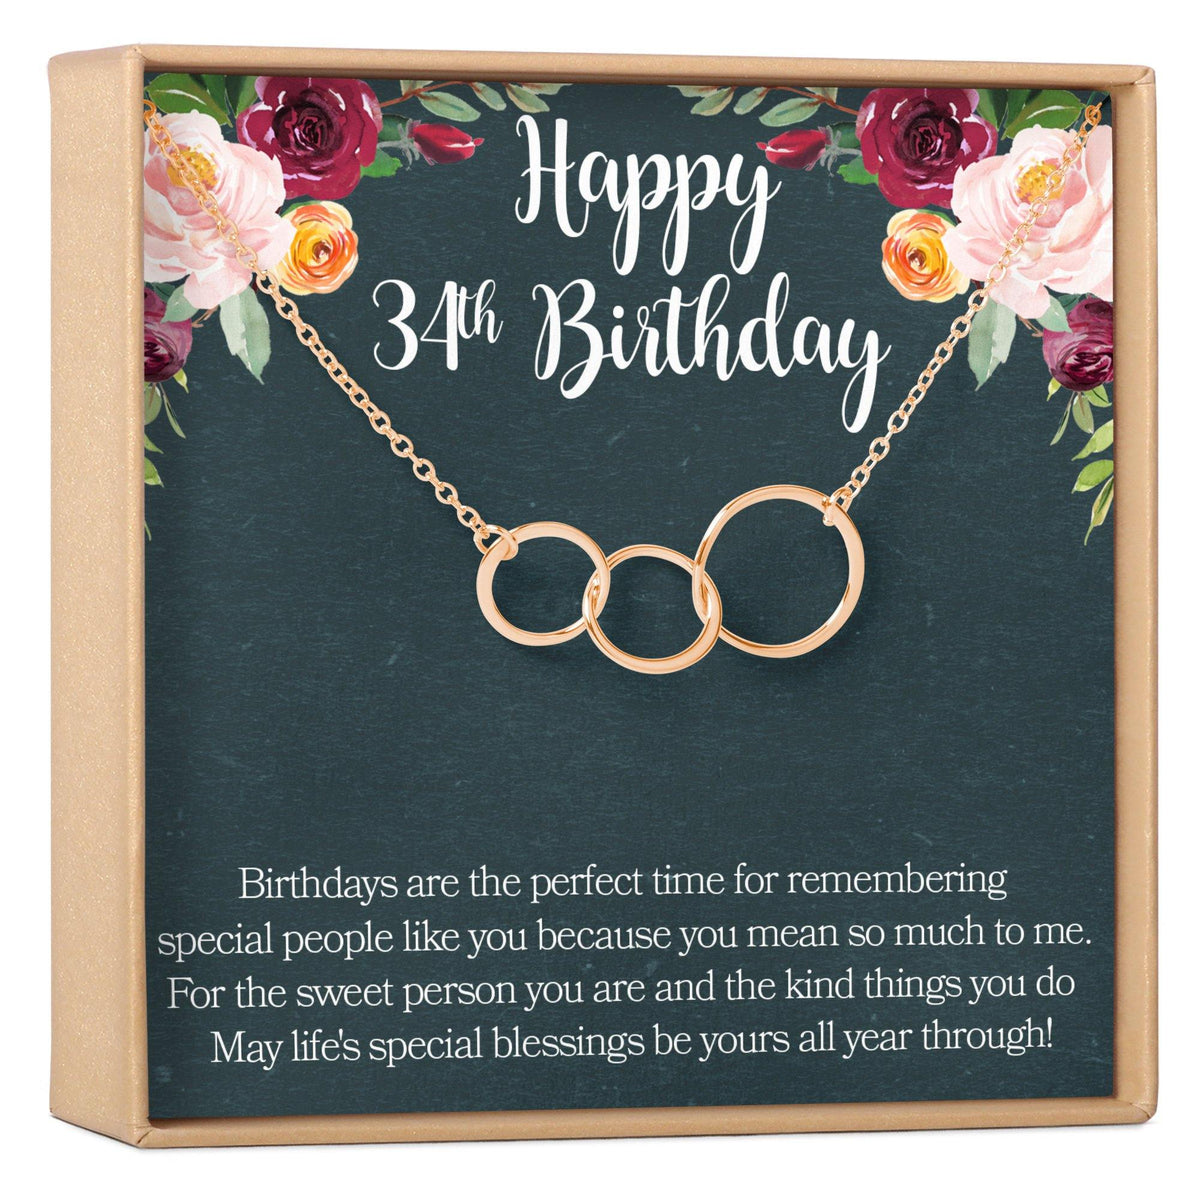 34th Birthday Necklace - Dear Ava, Jewelry / Necklaces / Pendants